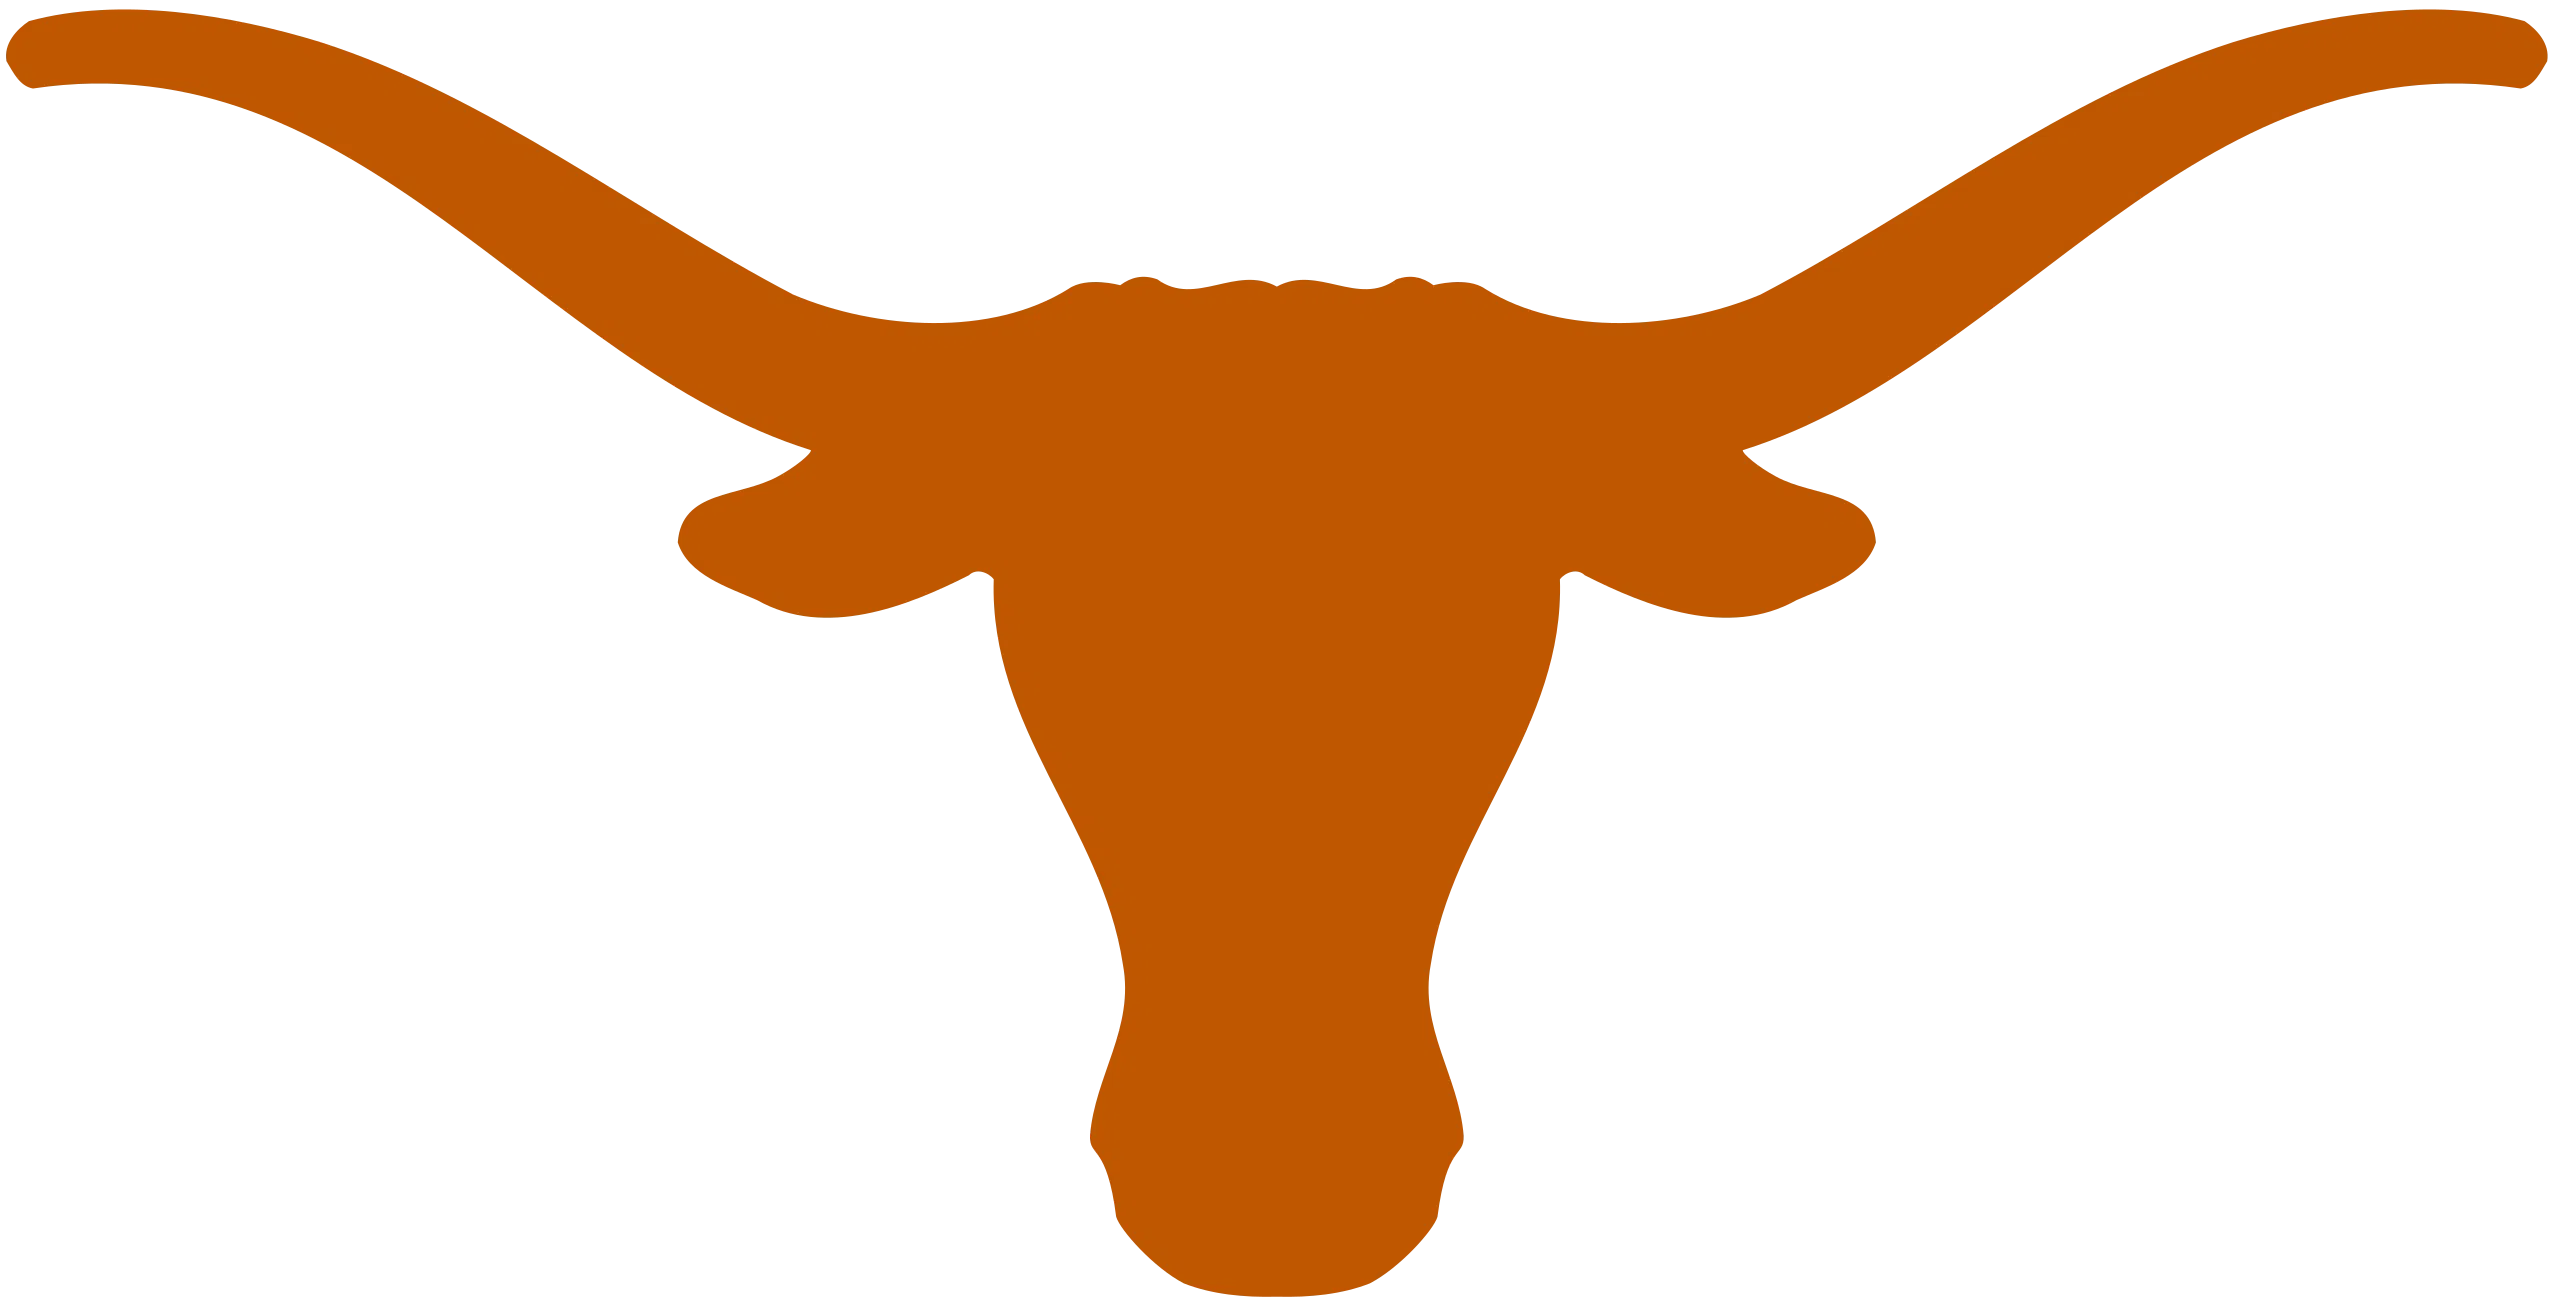 Texas Claims Big 12 Tournament Crown for Second Time in Three Years: No. 6 Longhorns Triumph Over Iowa State